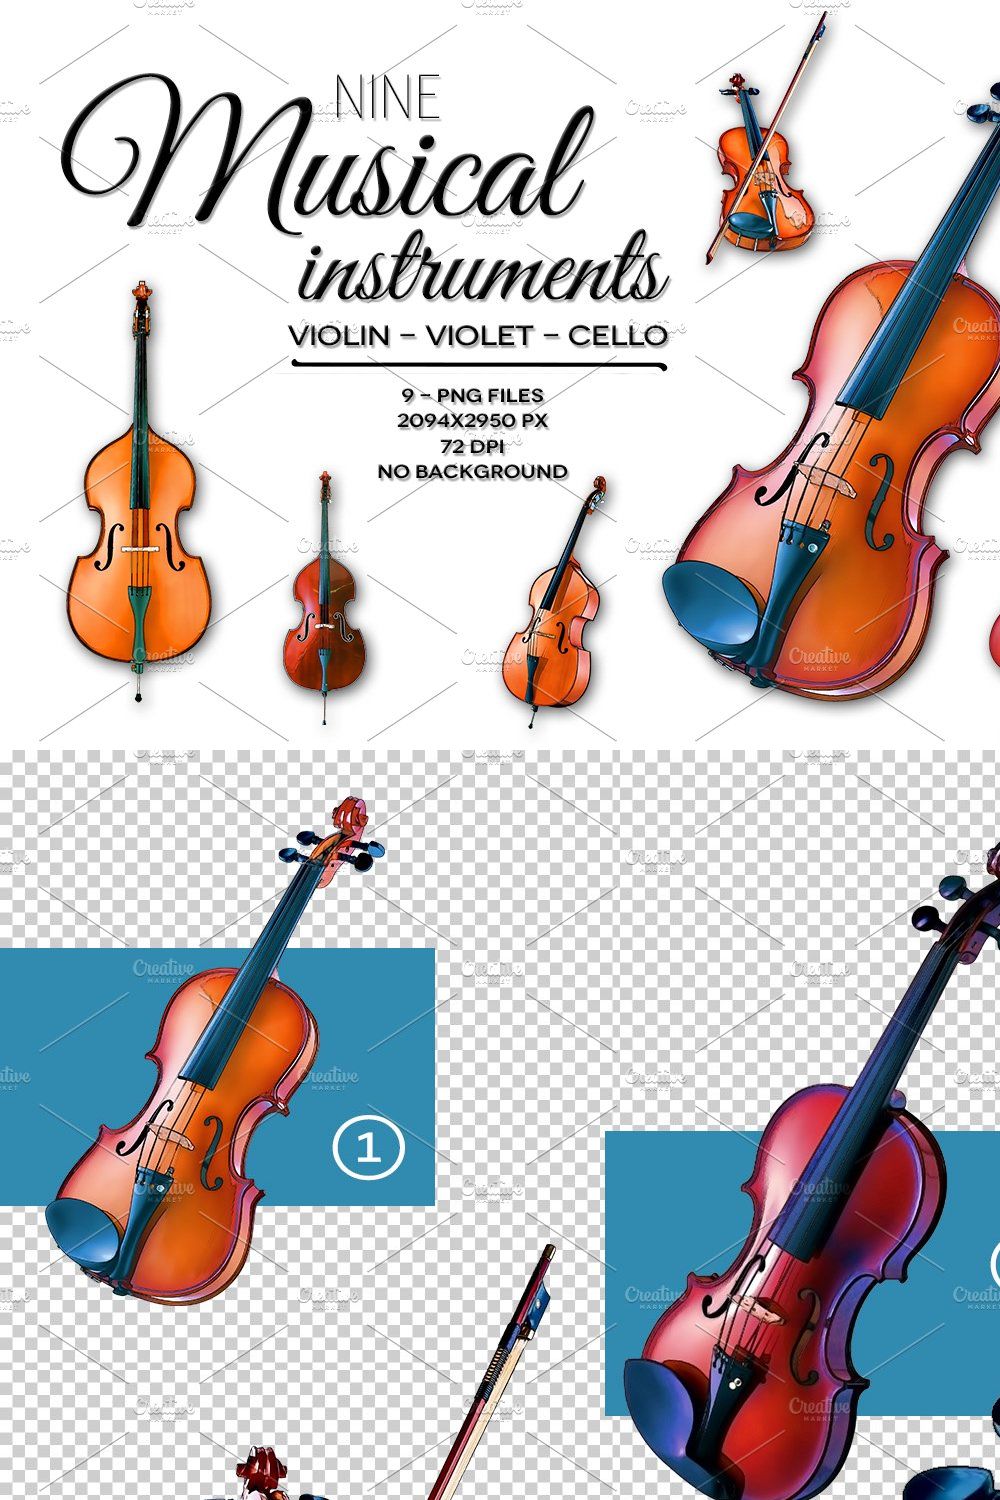 Nine Musical Instruments pinterest preview image.